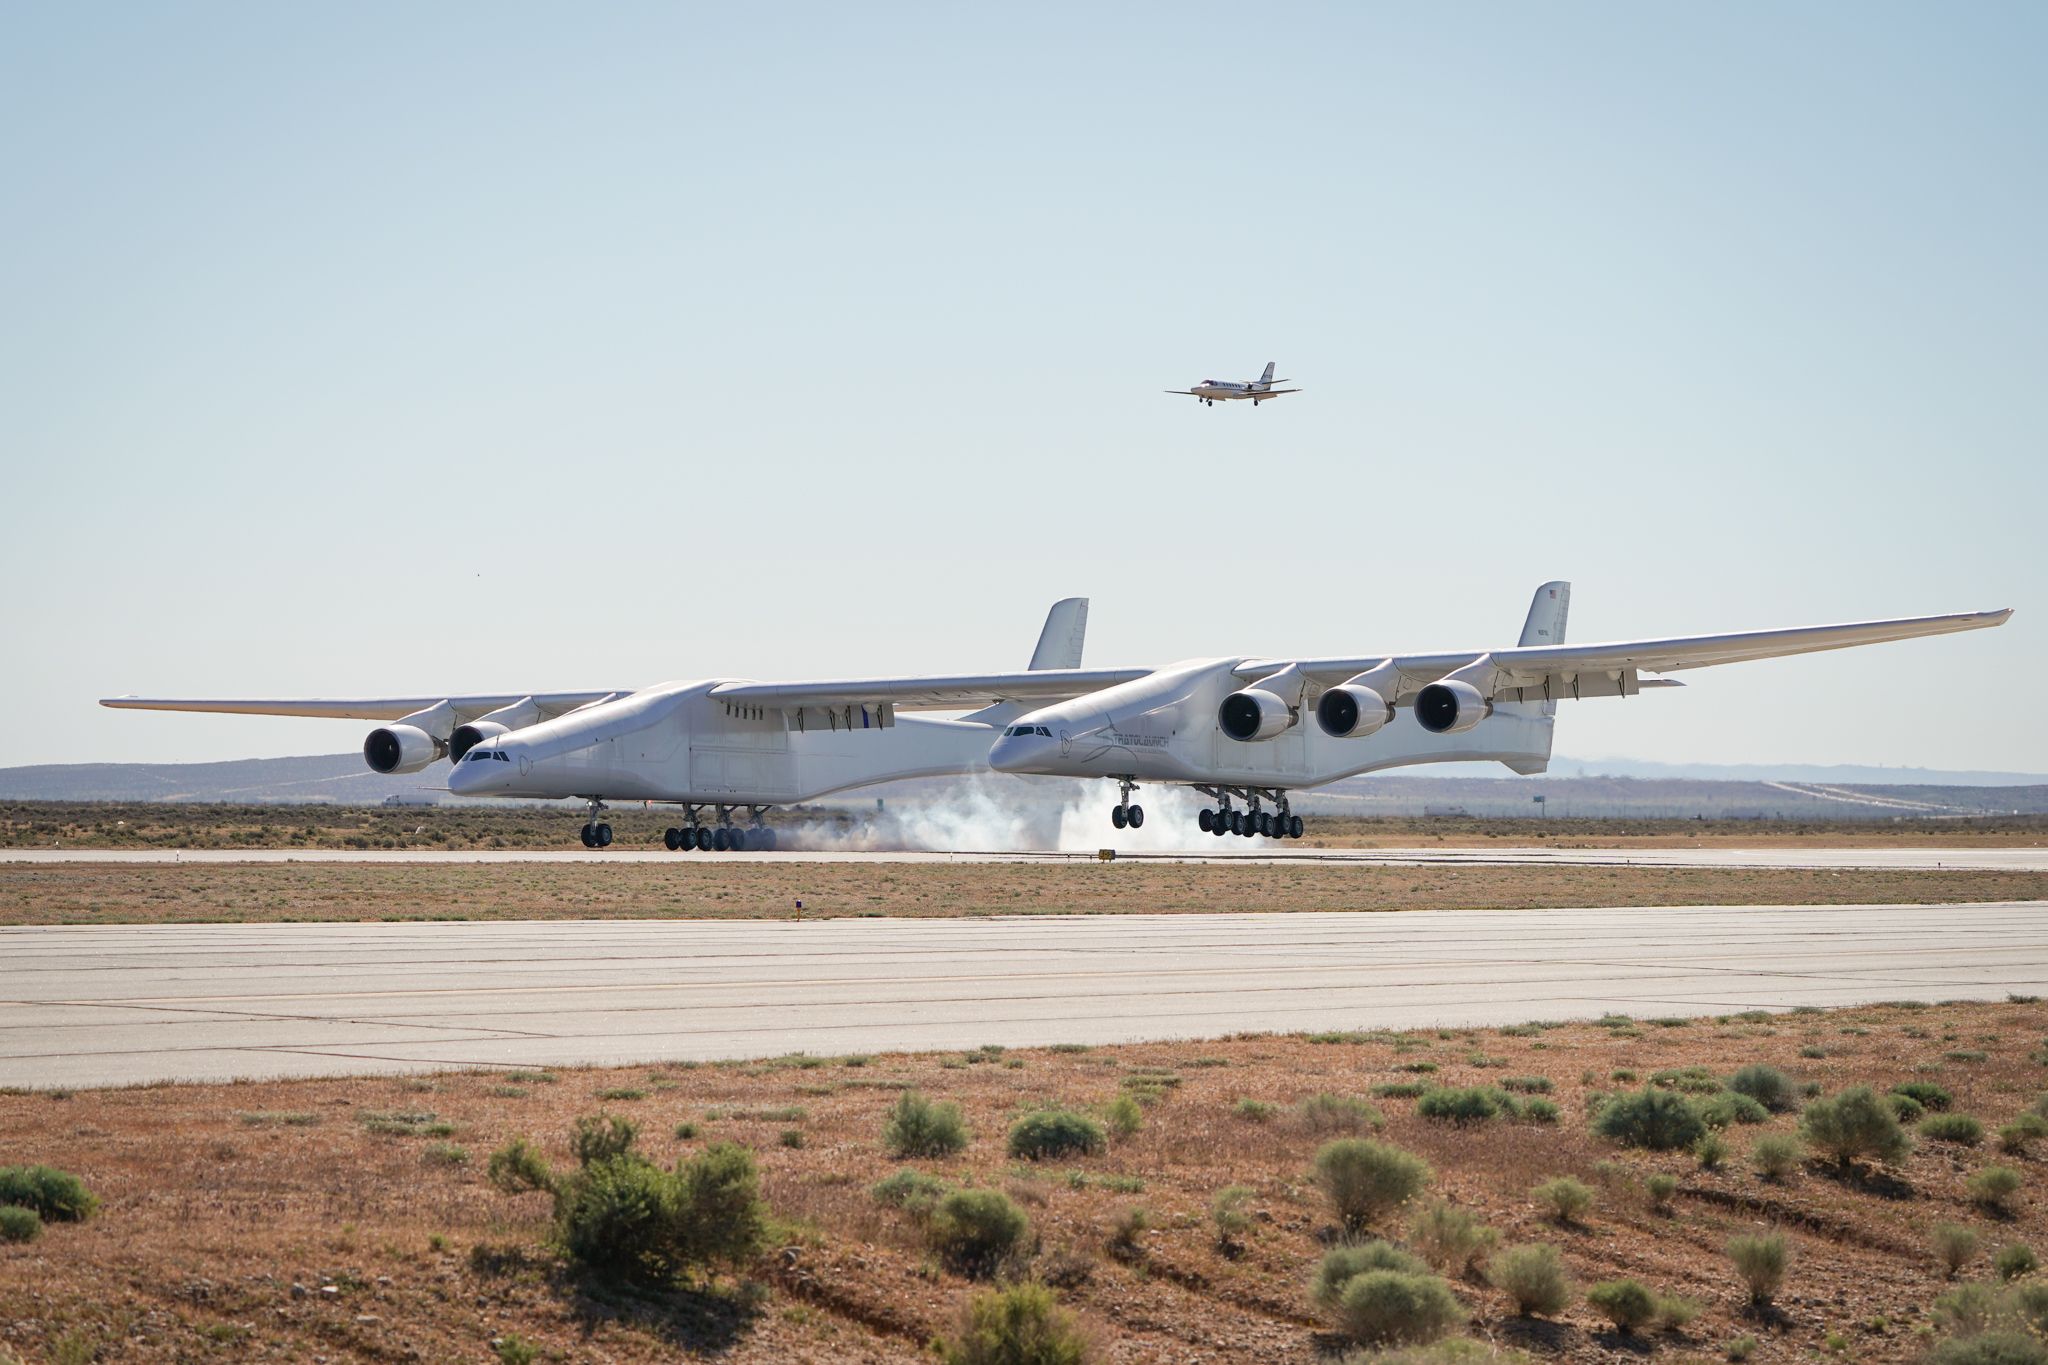 Stratolaunch, the world's largest airplane, lands at the Mojave Air and Space Port in California after its first successful flight on April 13, 2019.